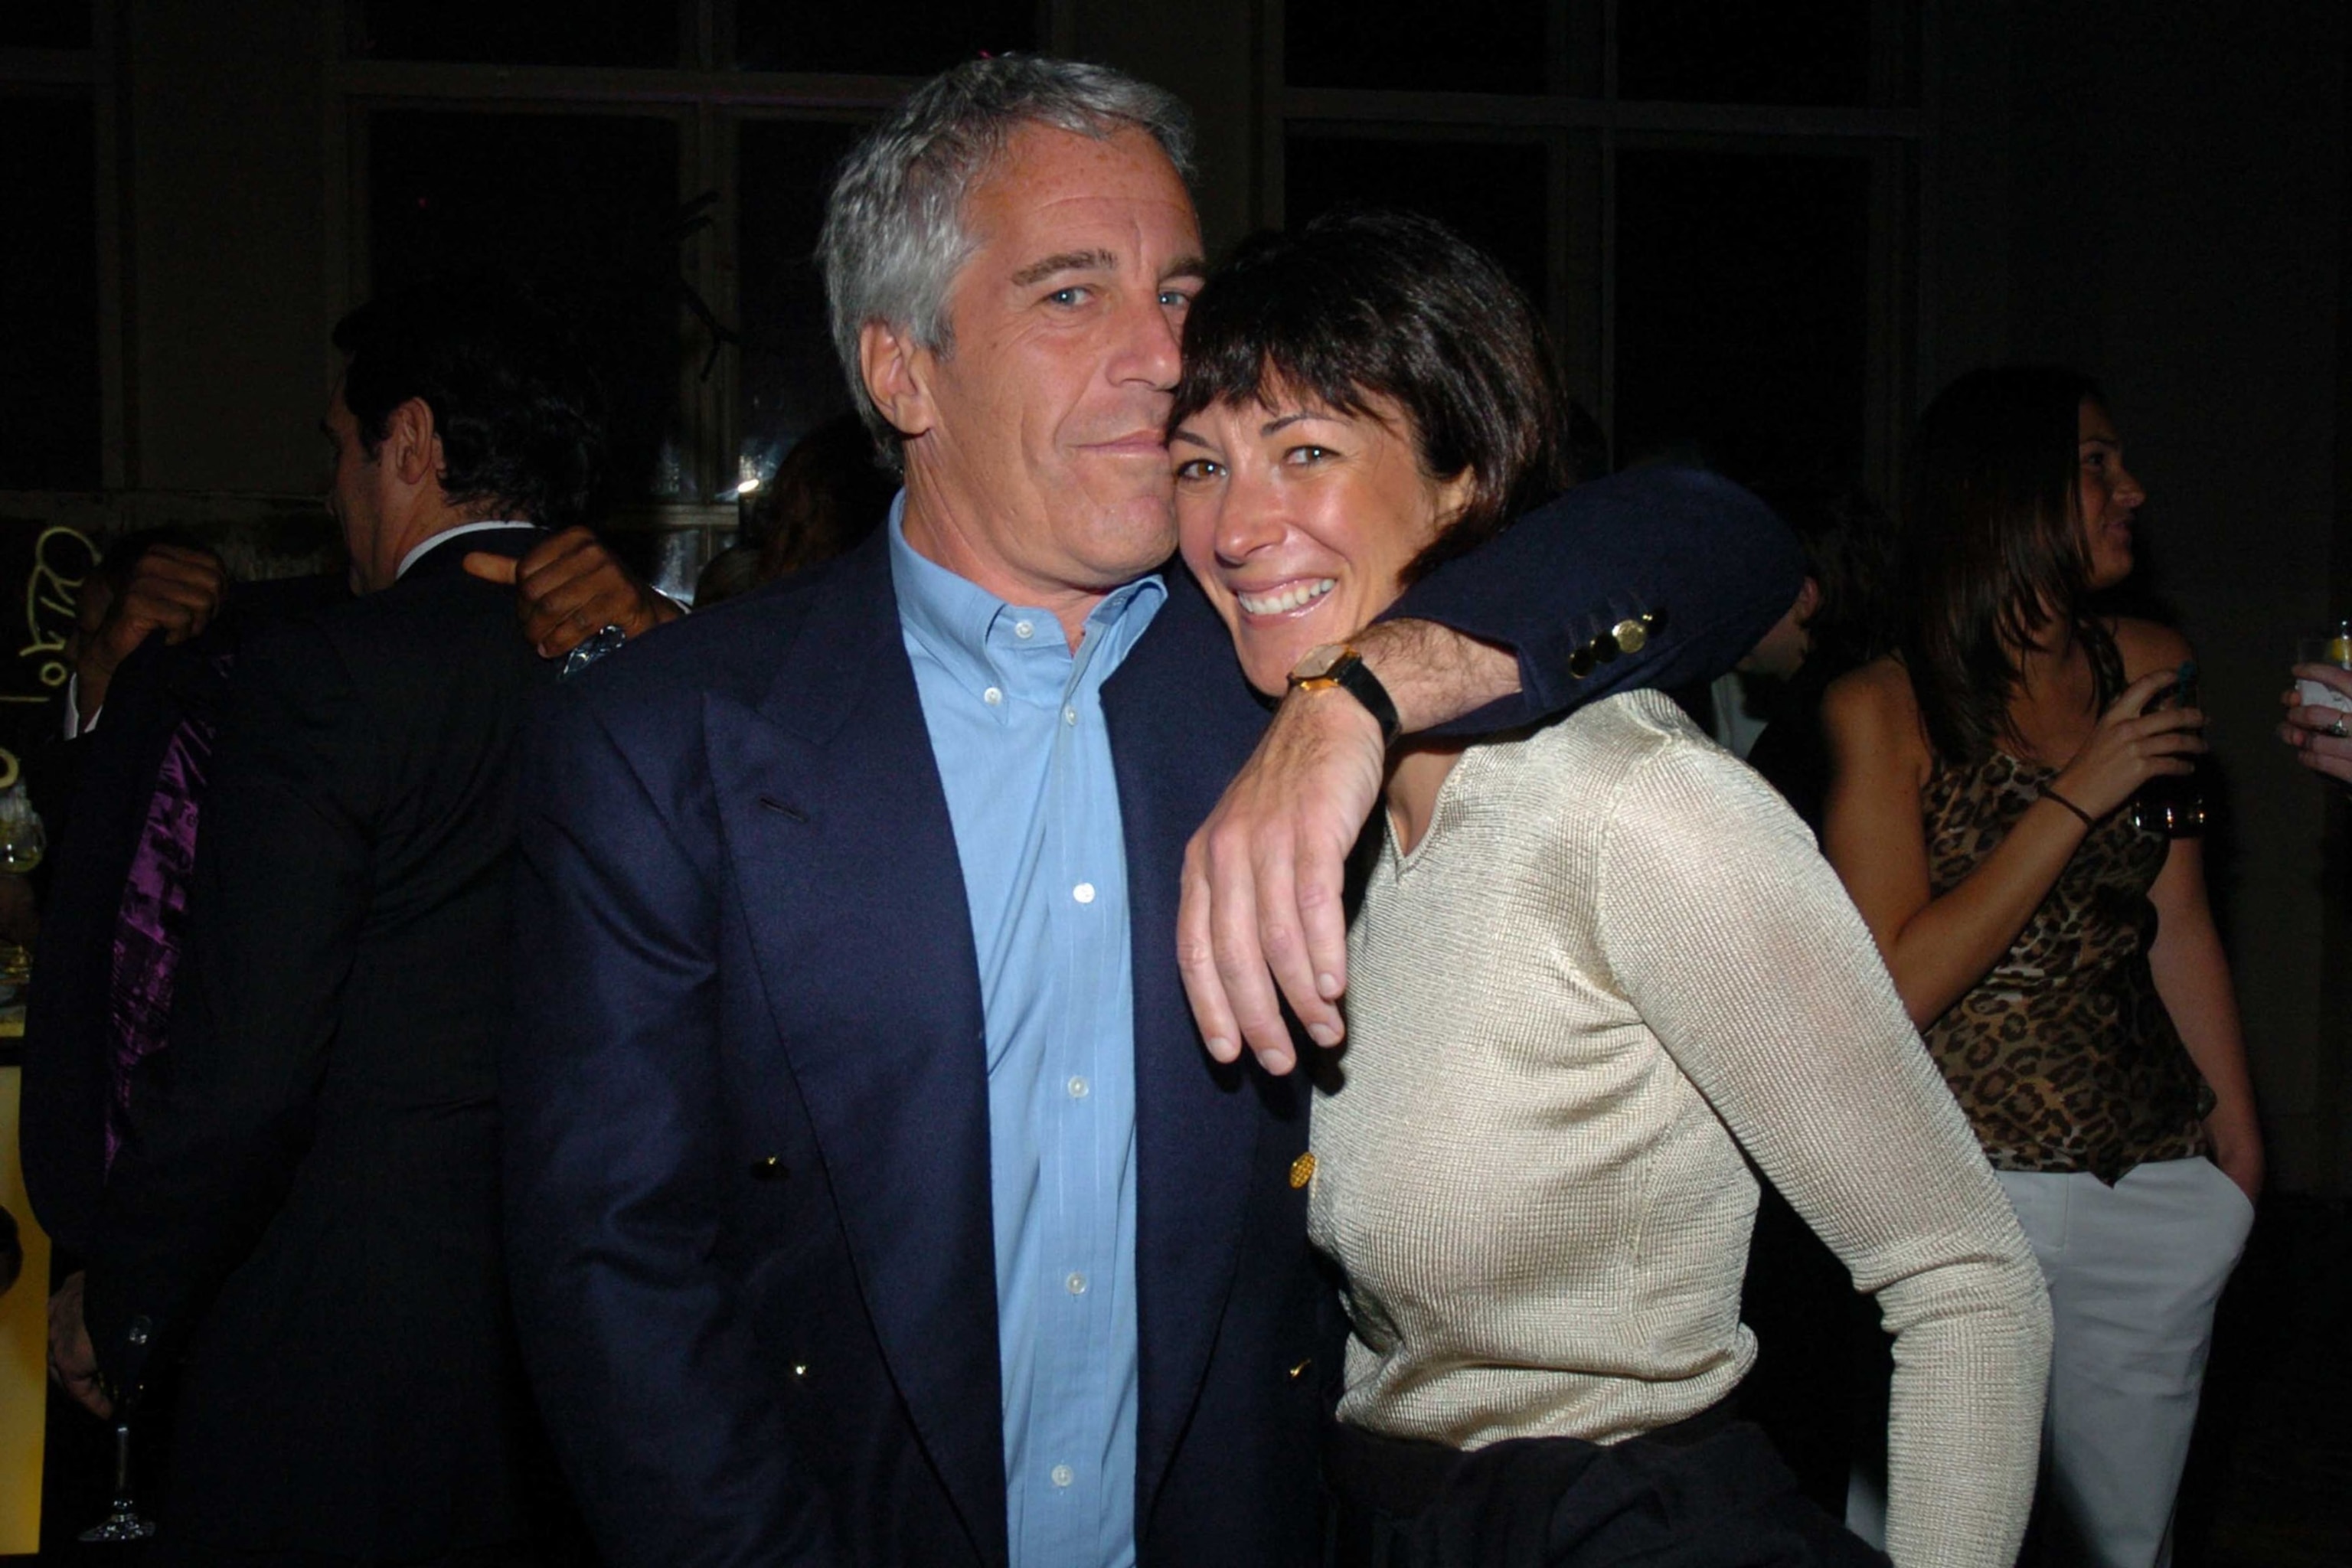 PHOTO:In this March 15, 2005 file photo, Jeffrey Epstein and Ghislaine Maxwell attend The 2005 Wall Street Concert Series Benefitting Wall Street Rising at Cipriani Wall Street in New York. 